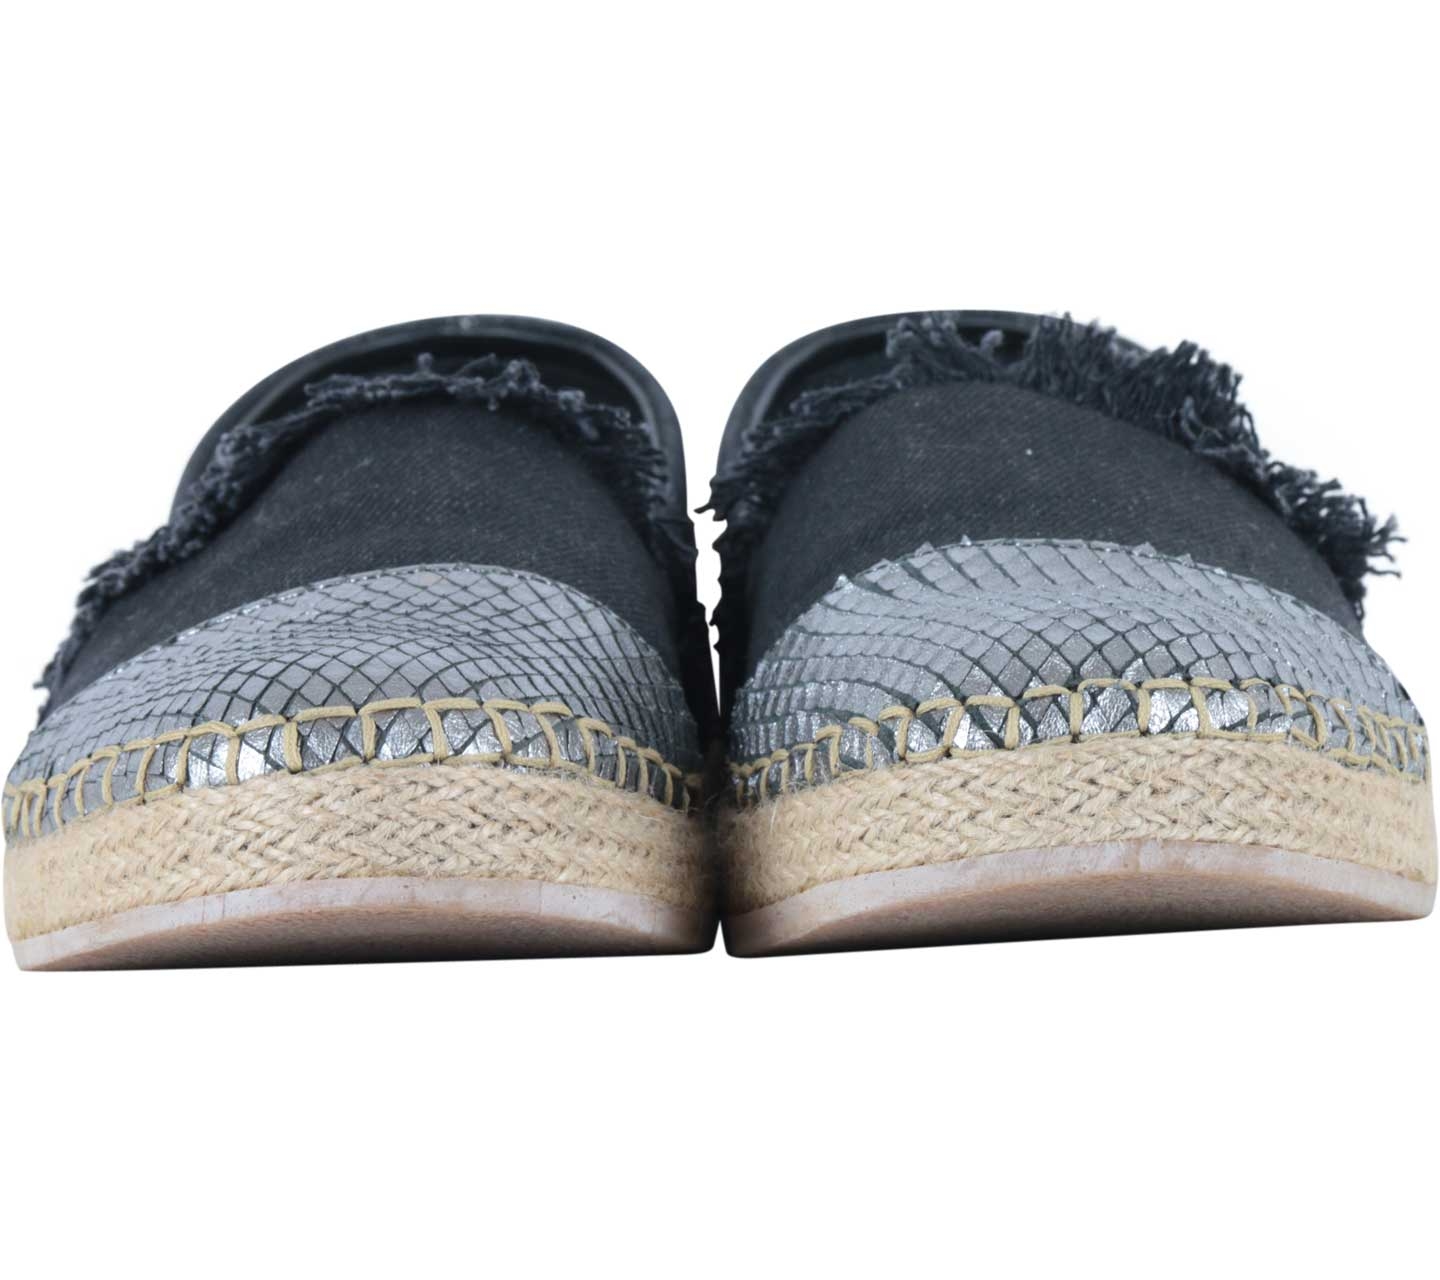 We Are Simplicite Black And Silver Snake Skin Espadrilles Flats